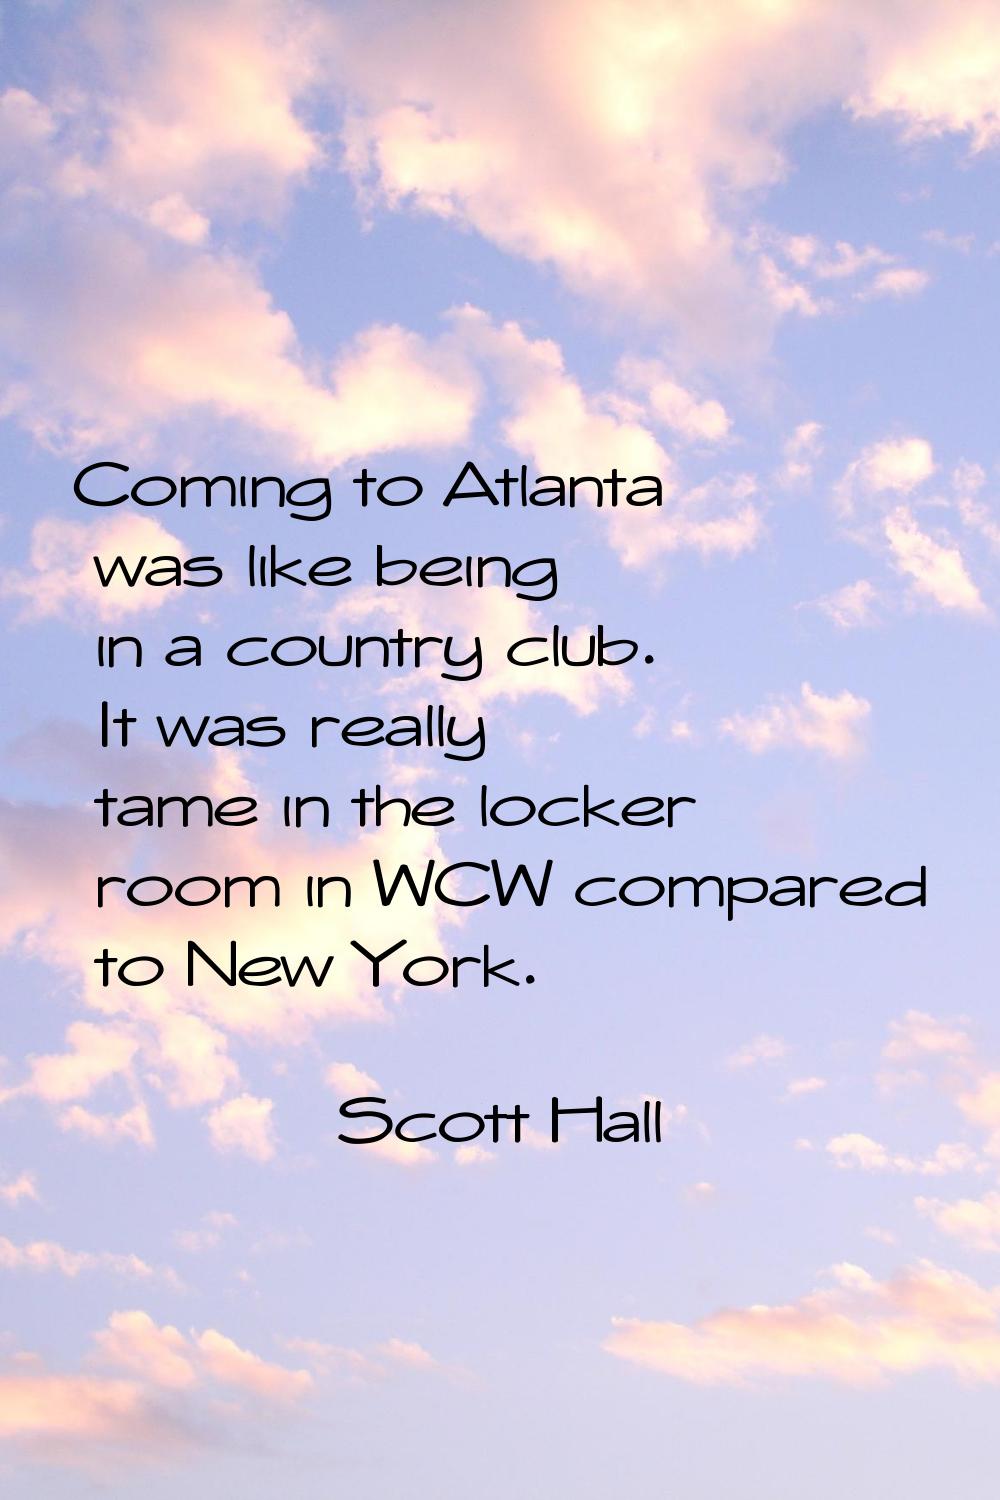 Coming to Atlanta was like being in a country club. It was really tame in the locker room in WCW co